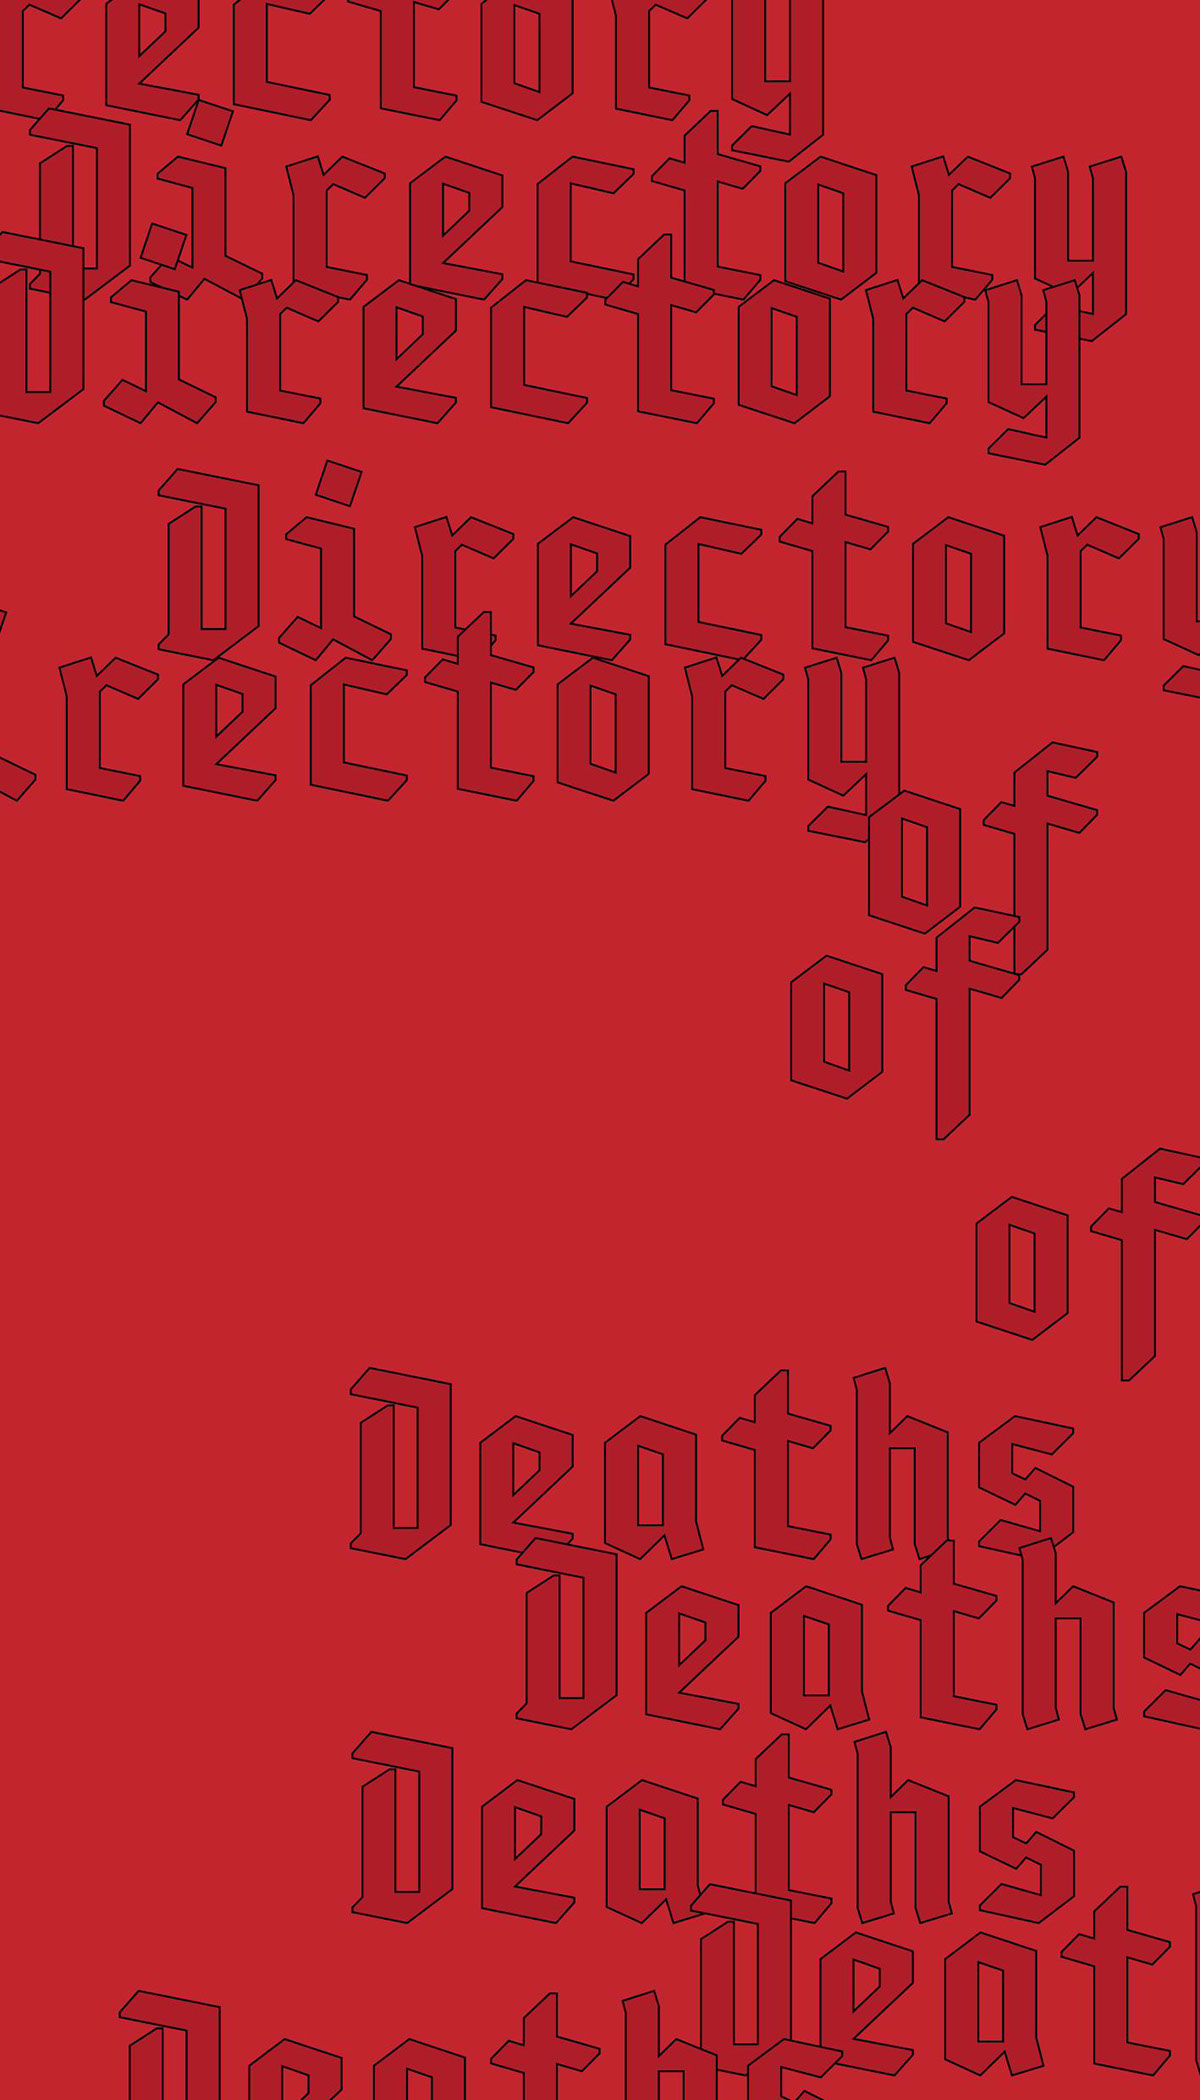 Directory of Deaths_soft copy rendition image